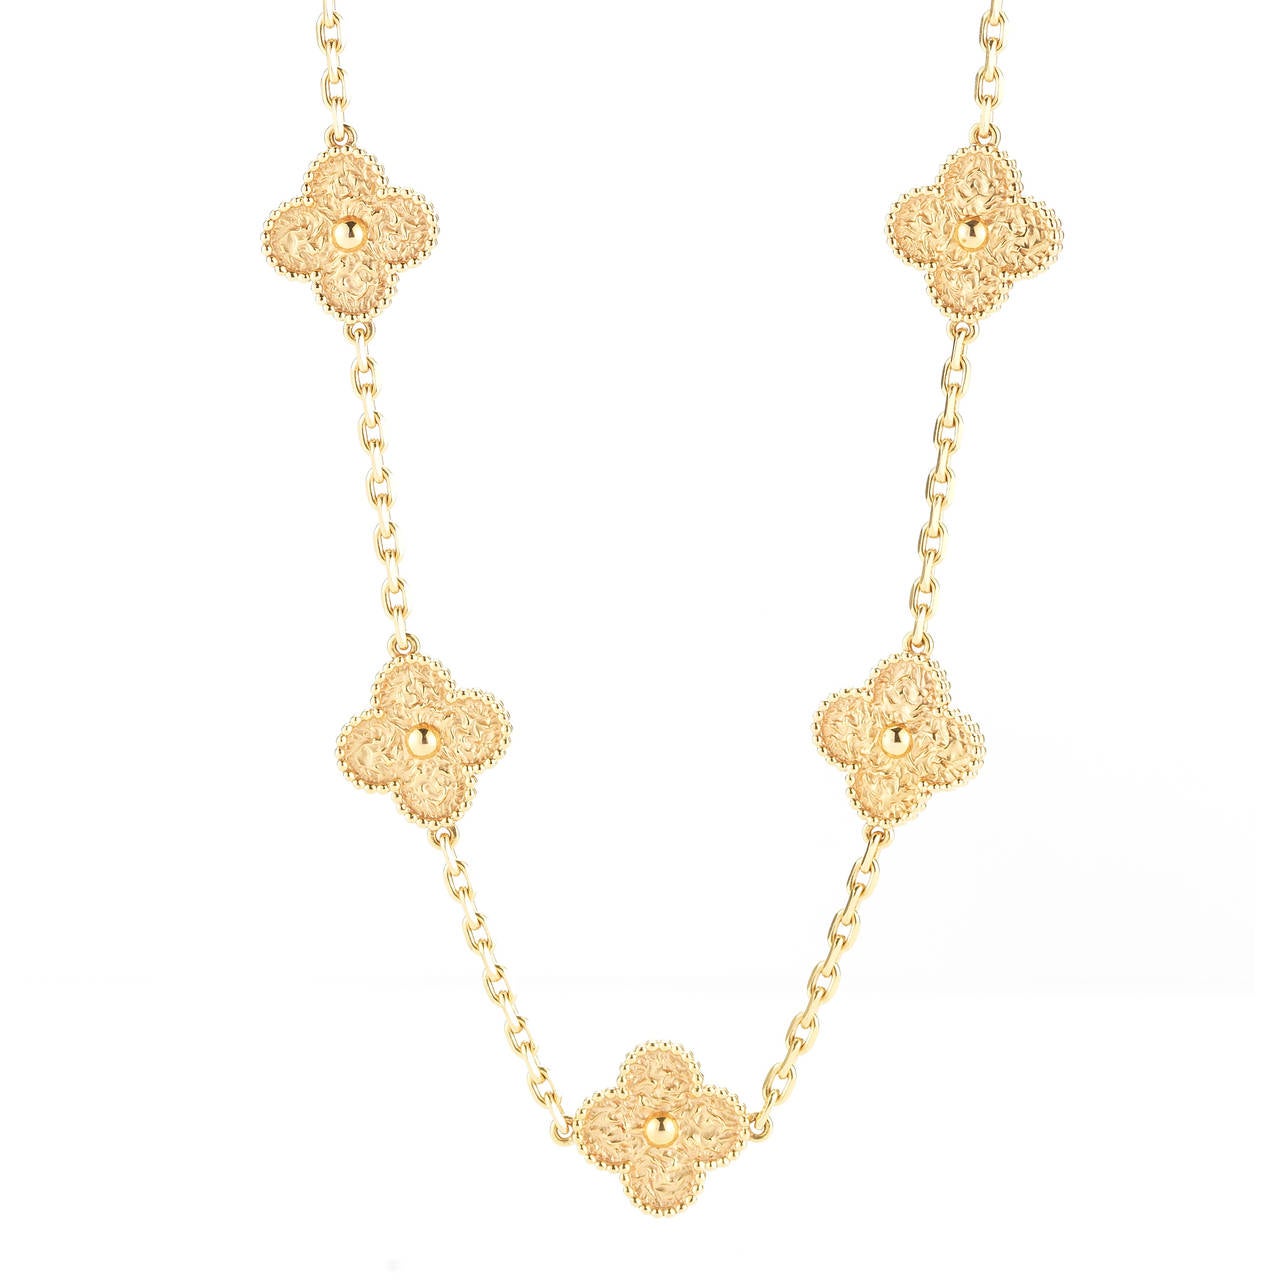 This is a stunning Van Cleef & Arpels Vintage Alhambra necklace. It contains 20 motifs, and is 33